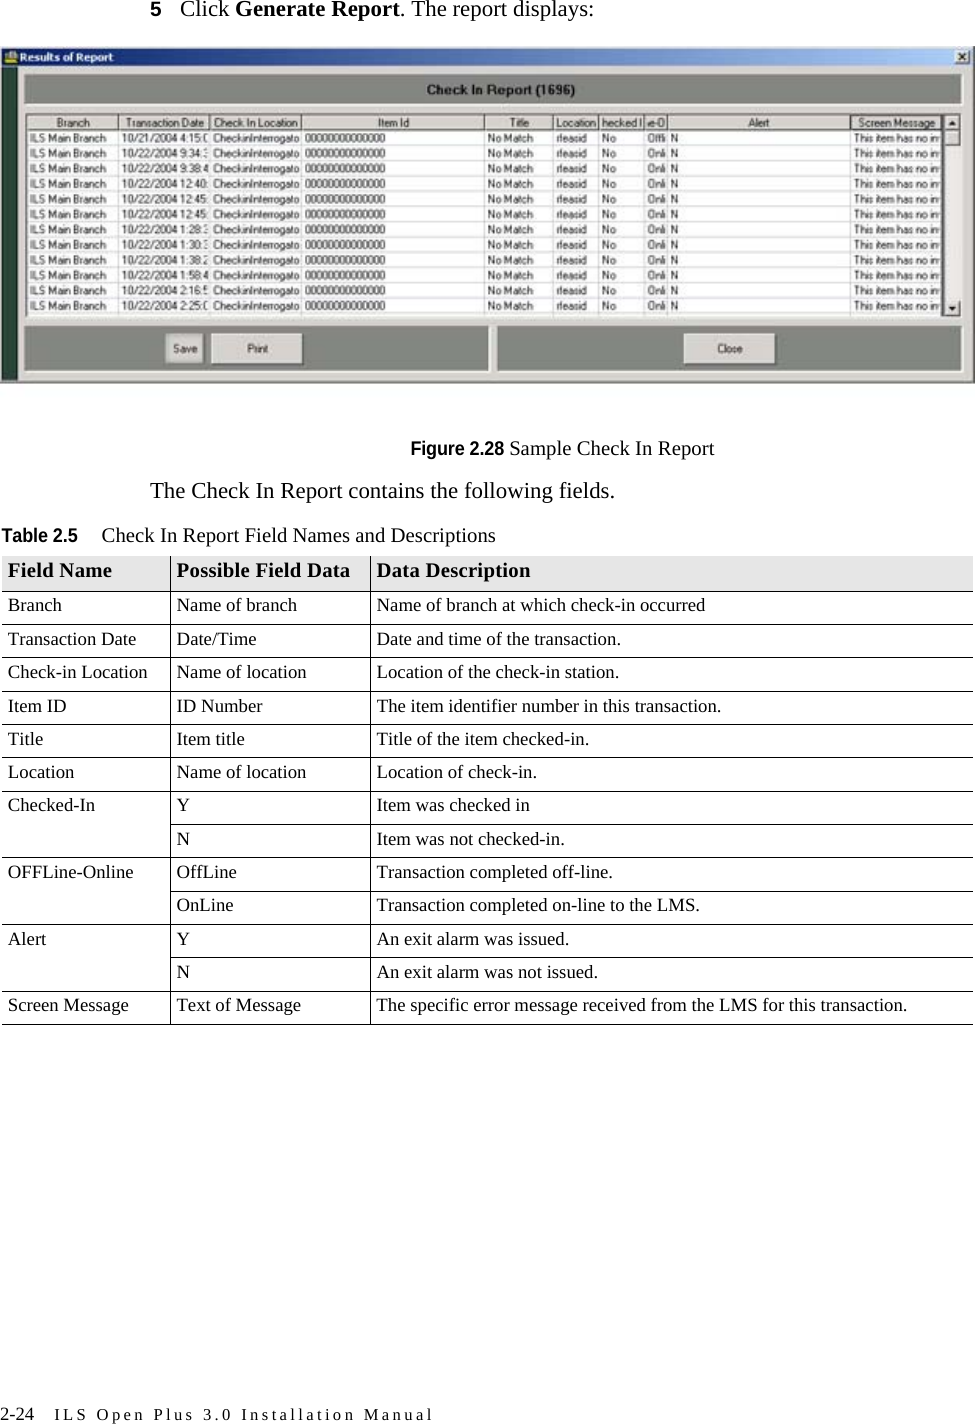 2-24 ILS Open Plus 3.0 Installation Manual5Click Generate Report. The report displays:Figure 2.28 Sample Check In ReportThe Check In Report contains the following fields.Table 2.5Check In Report Field Names and DescriptionsField Name Possible Field Data Data DescriptionBranch Name of branch Name of branch at which check-in occurredTransaction Date Date/Time Date and time of the transaction.Check-in Location Name of location Location of the check-in station.Item ID ID Number The item identifier number in this transaction.Title Item title Title of the item checked-in.Location Name of location Location of check-in.Checked-In Y Item was checked inN Item was not checked-in.OFFLine-Online OffLine Transaction completed off-line.OnLine Transaction completed on-line to the LMS.Alert Y An exit alarm was issued.N An exit alarm was not issued.Screen Message Text of Message The specific error message received from the LMS for this transaction.